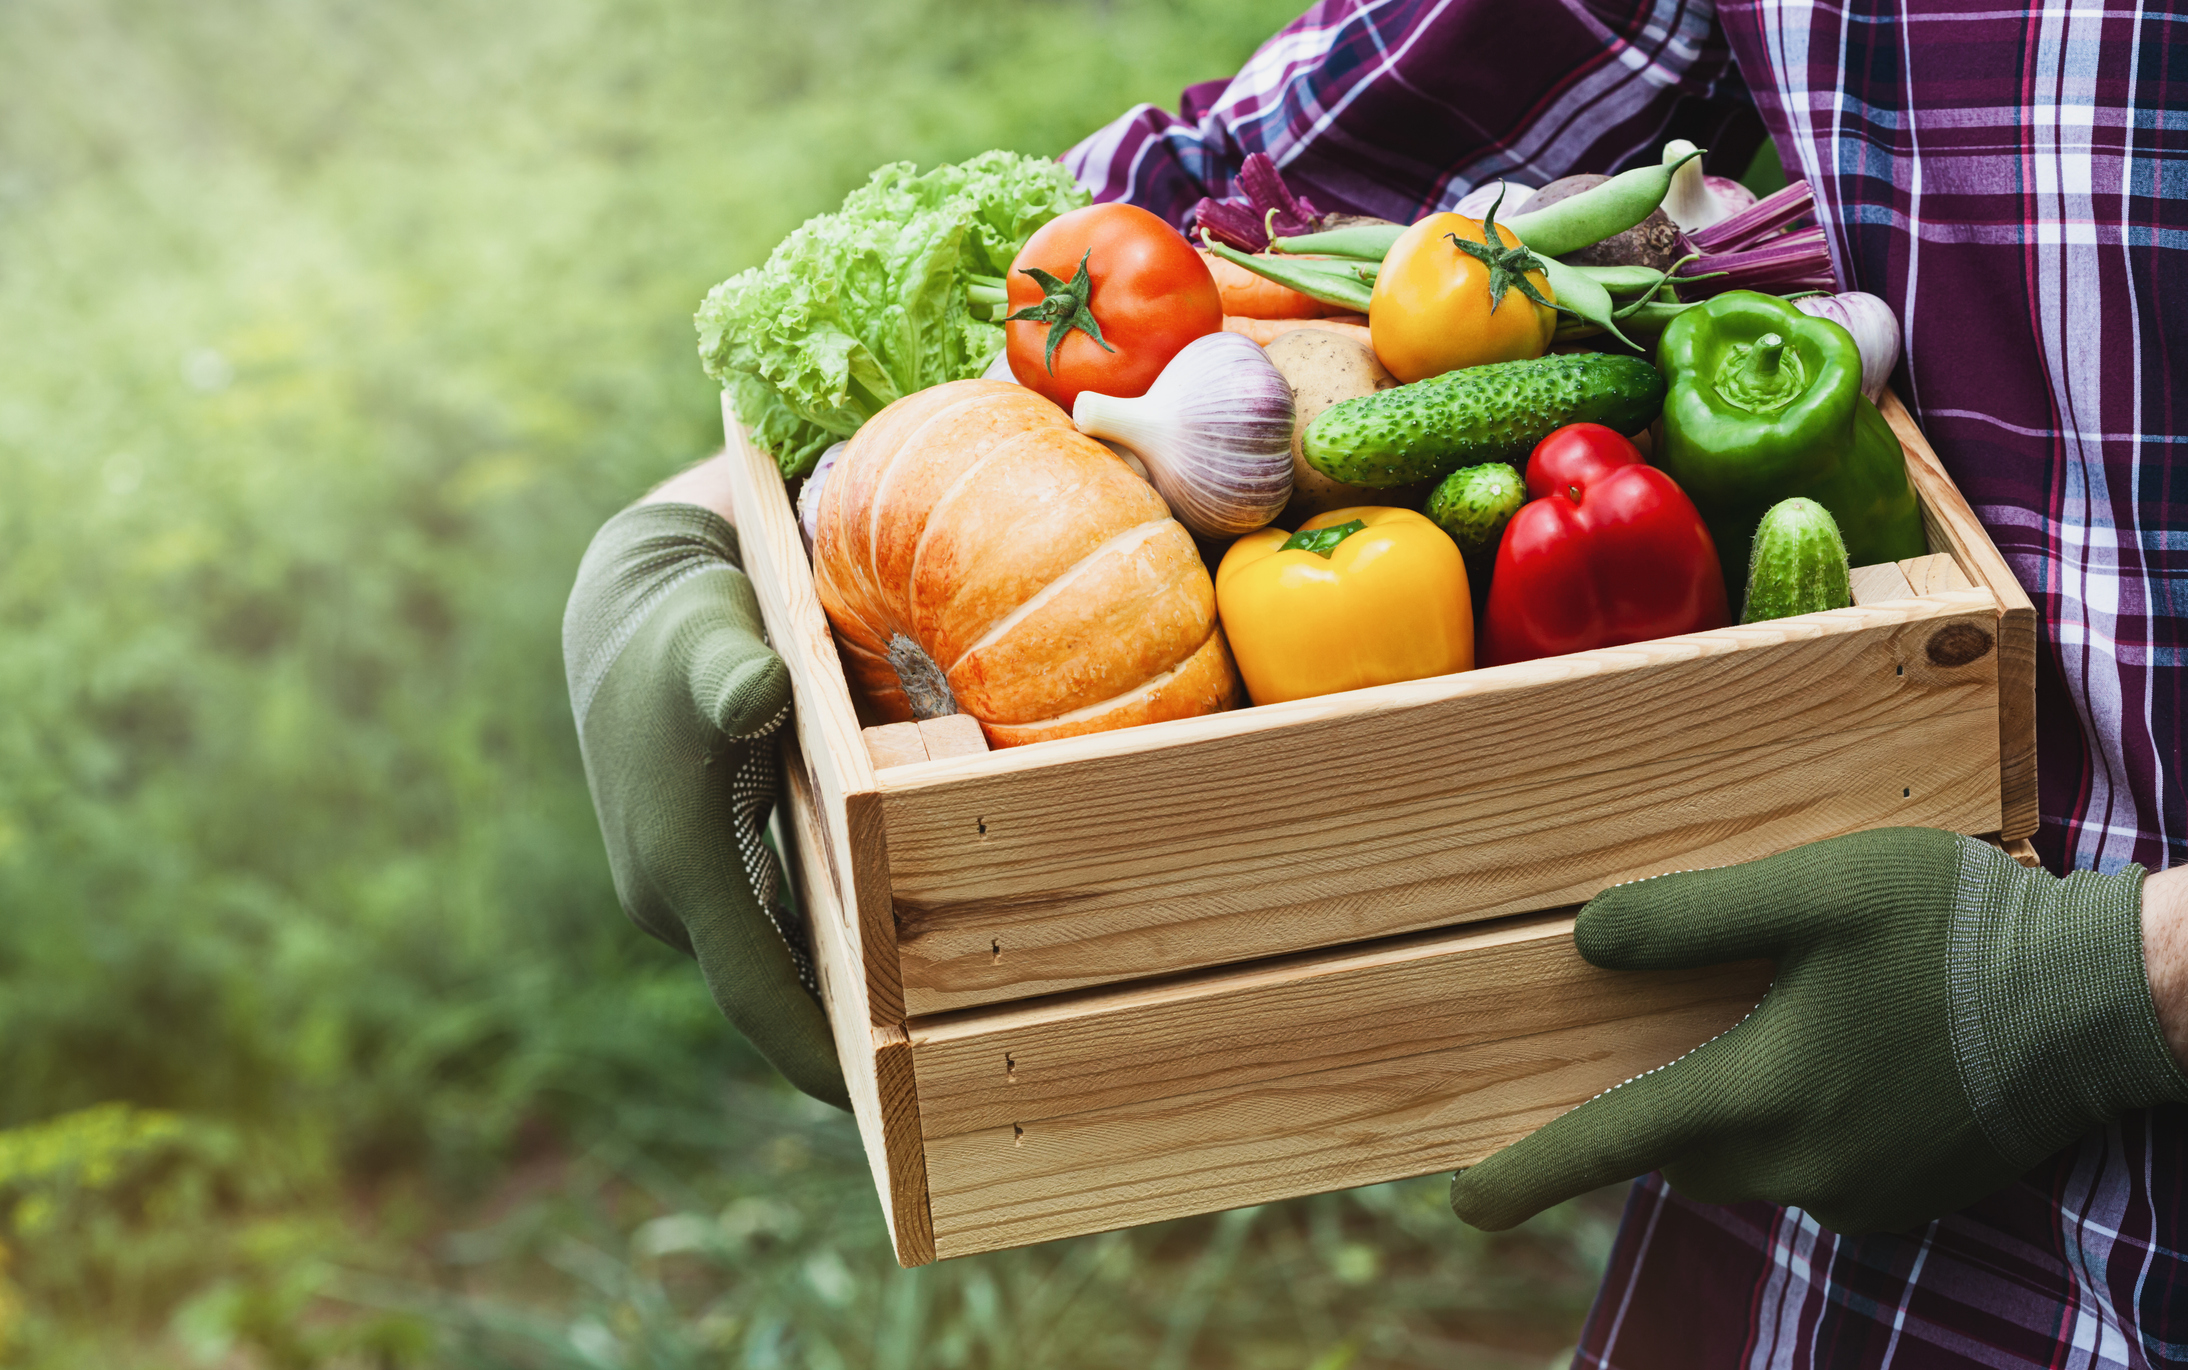 Farmer holds wooden box with vegetables from the garden